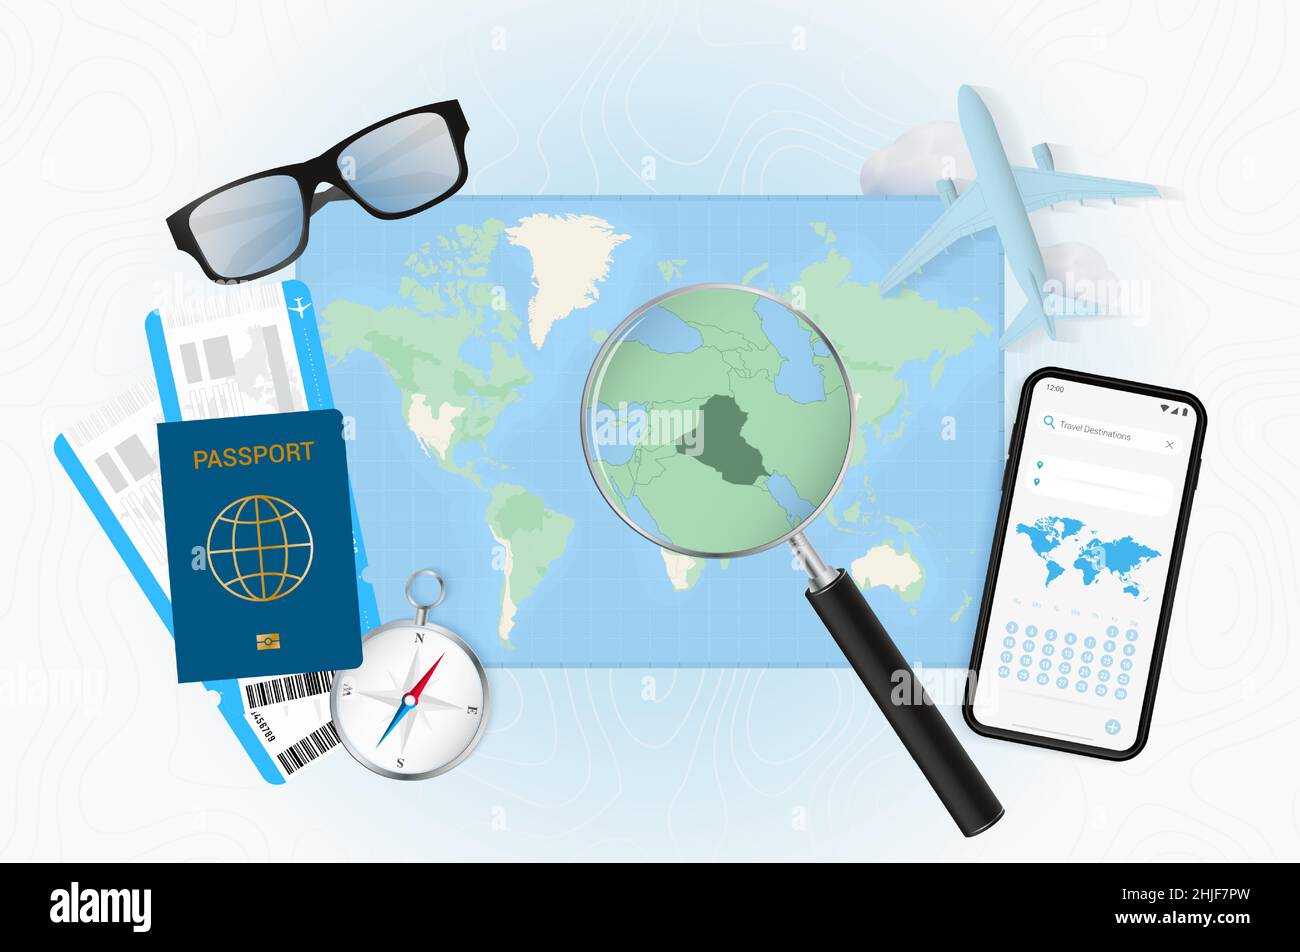 Conceptual illustration of a trip to Iraq with travel gear. World map with compass, passport, tickets, cell phone, plane and glass. Stock Vector